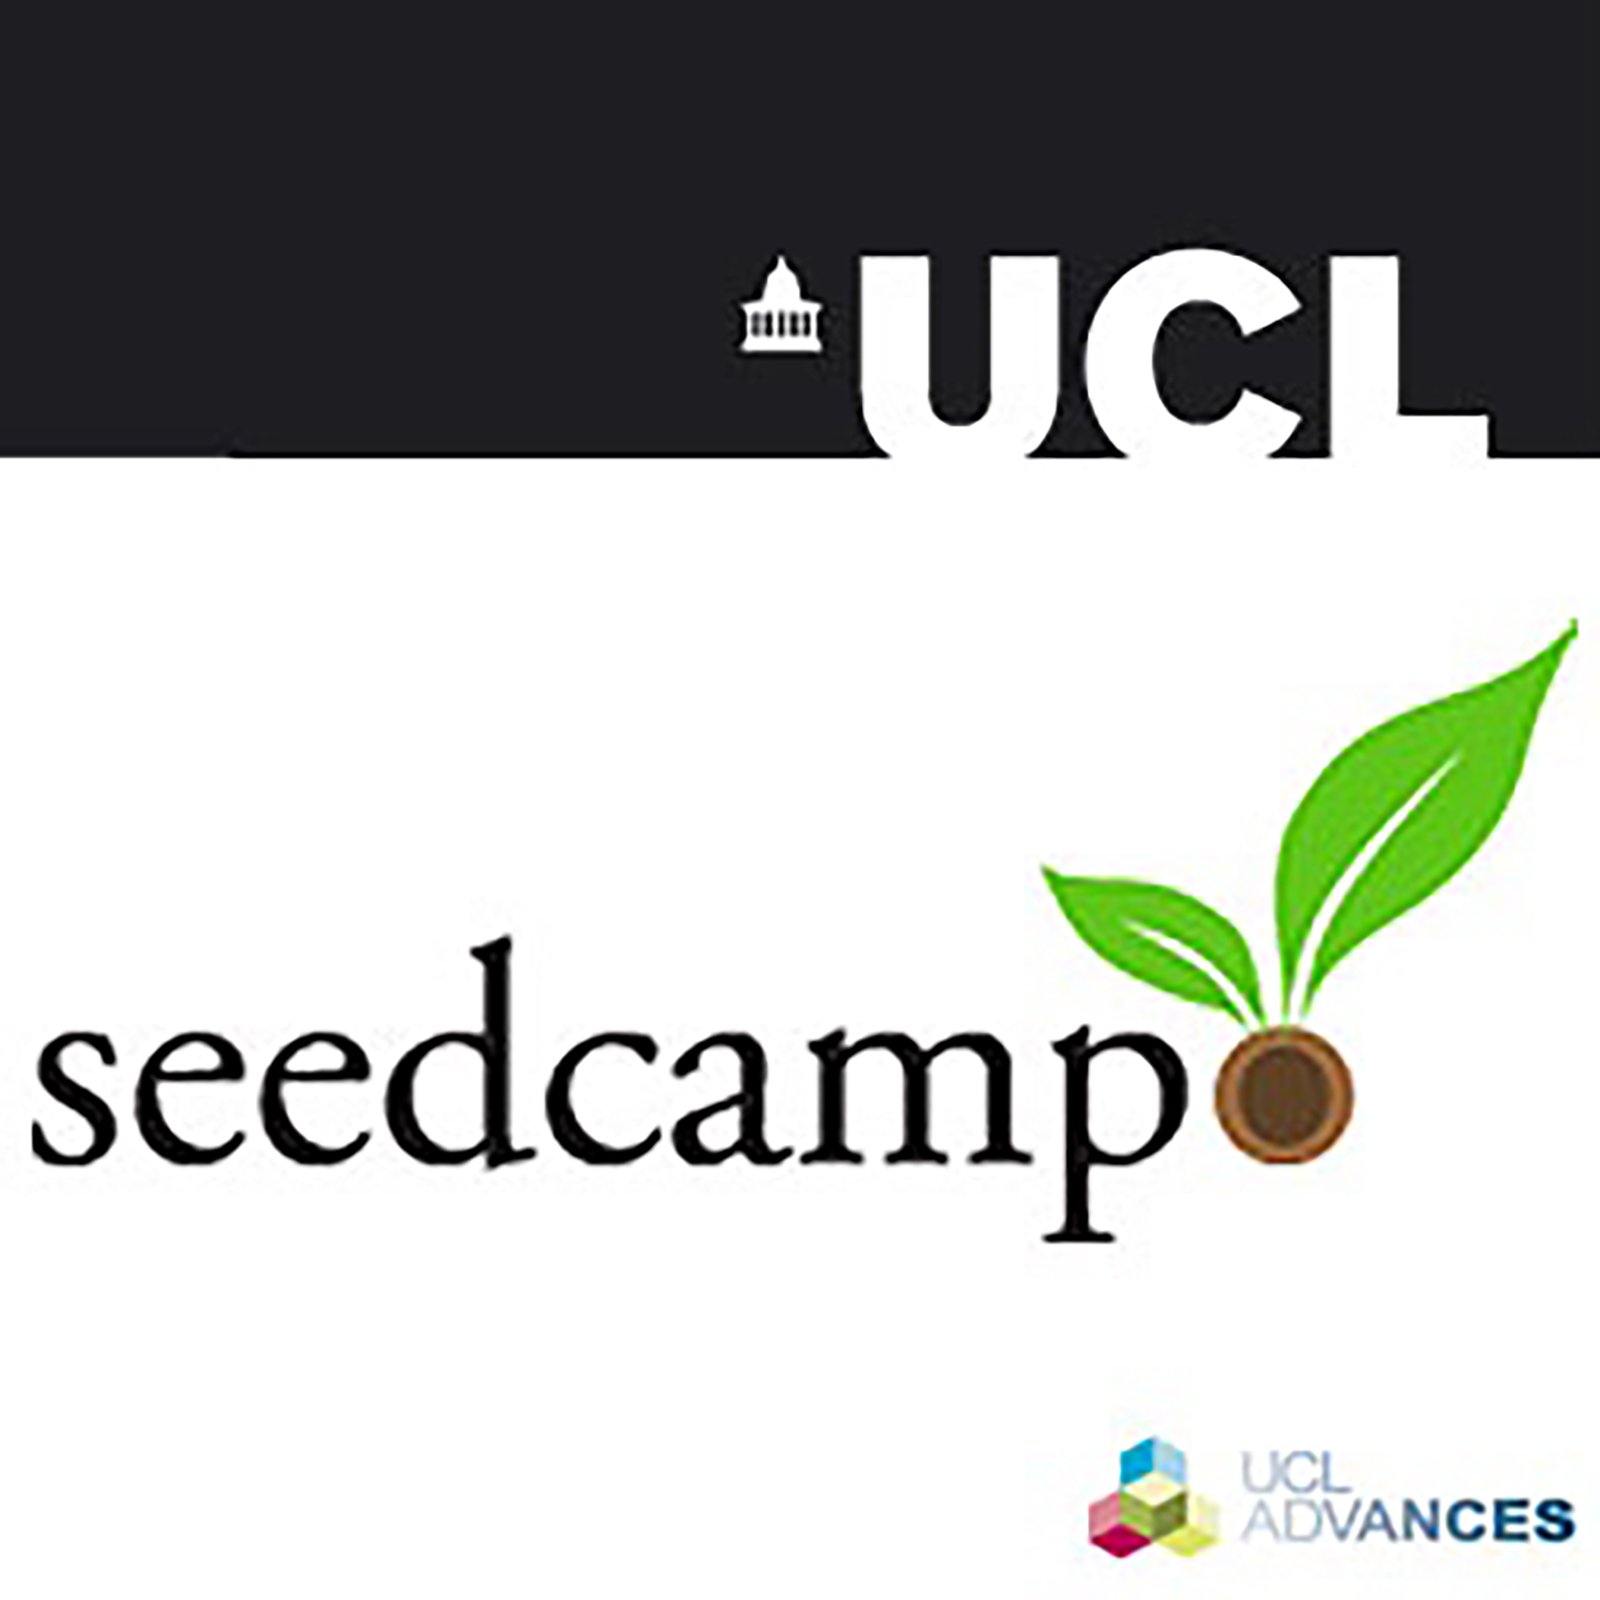 Seedcamp@UCL 2009: Day 3 - How to Scale - Video